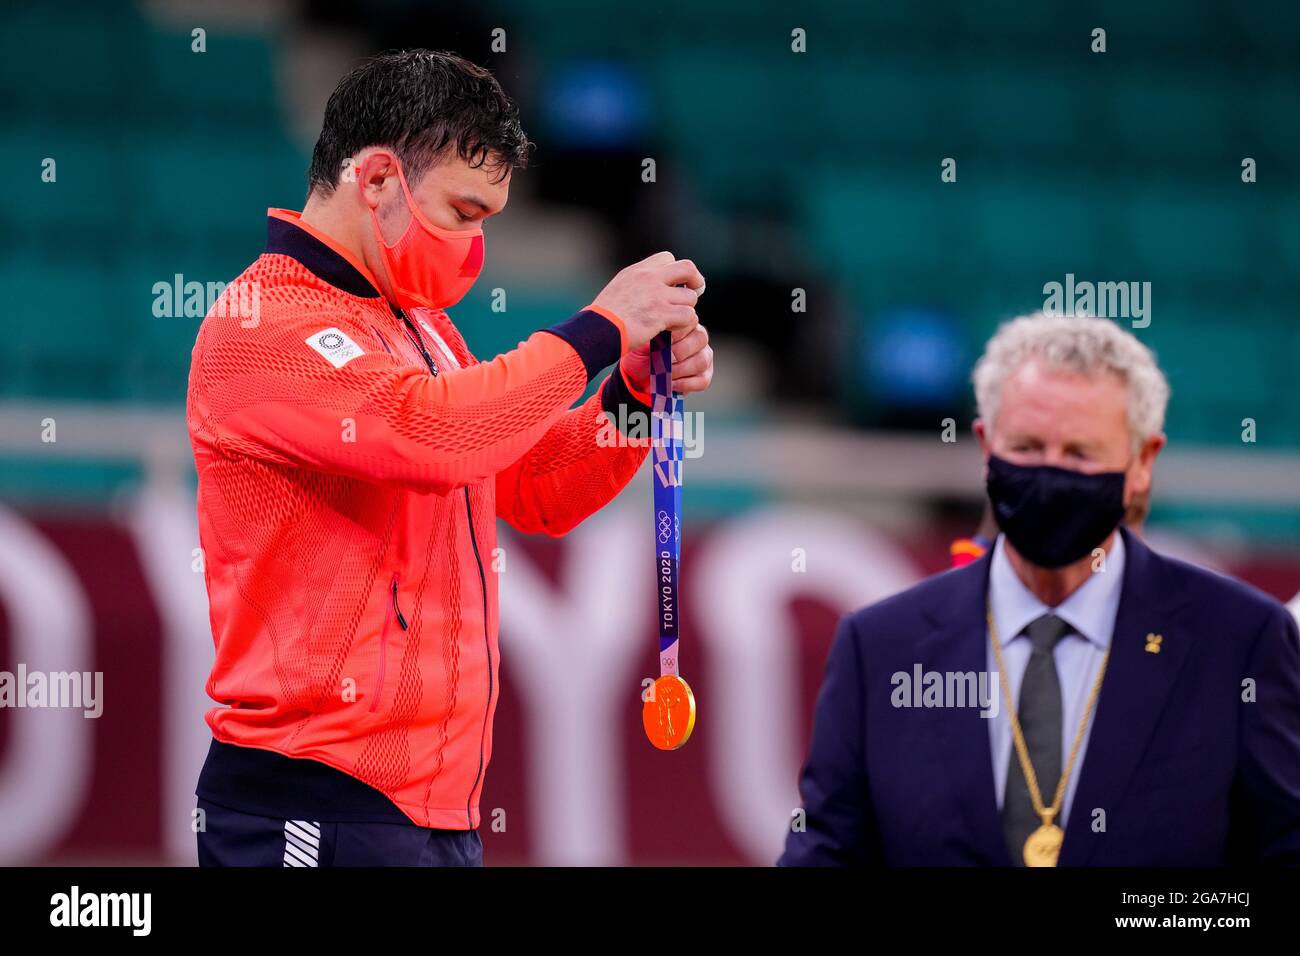 TOKYO, JAPAN - JULY 29: Aaron Wolf of Japan posing with the gold medal during the Medal Ceremony of Judo during the Tokyo 2020 Olympic Games at the Nippon Budokan on July 29, 2021 in Tokyo, Japan (Photo by Yannick Verhoeven/Orange Pictures) Stock Photo